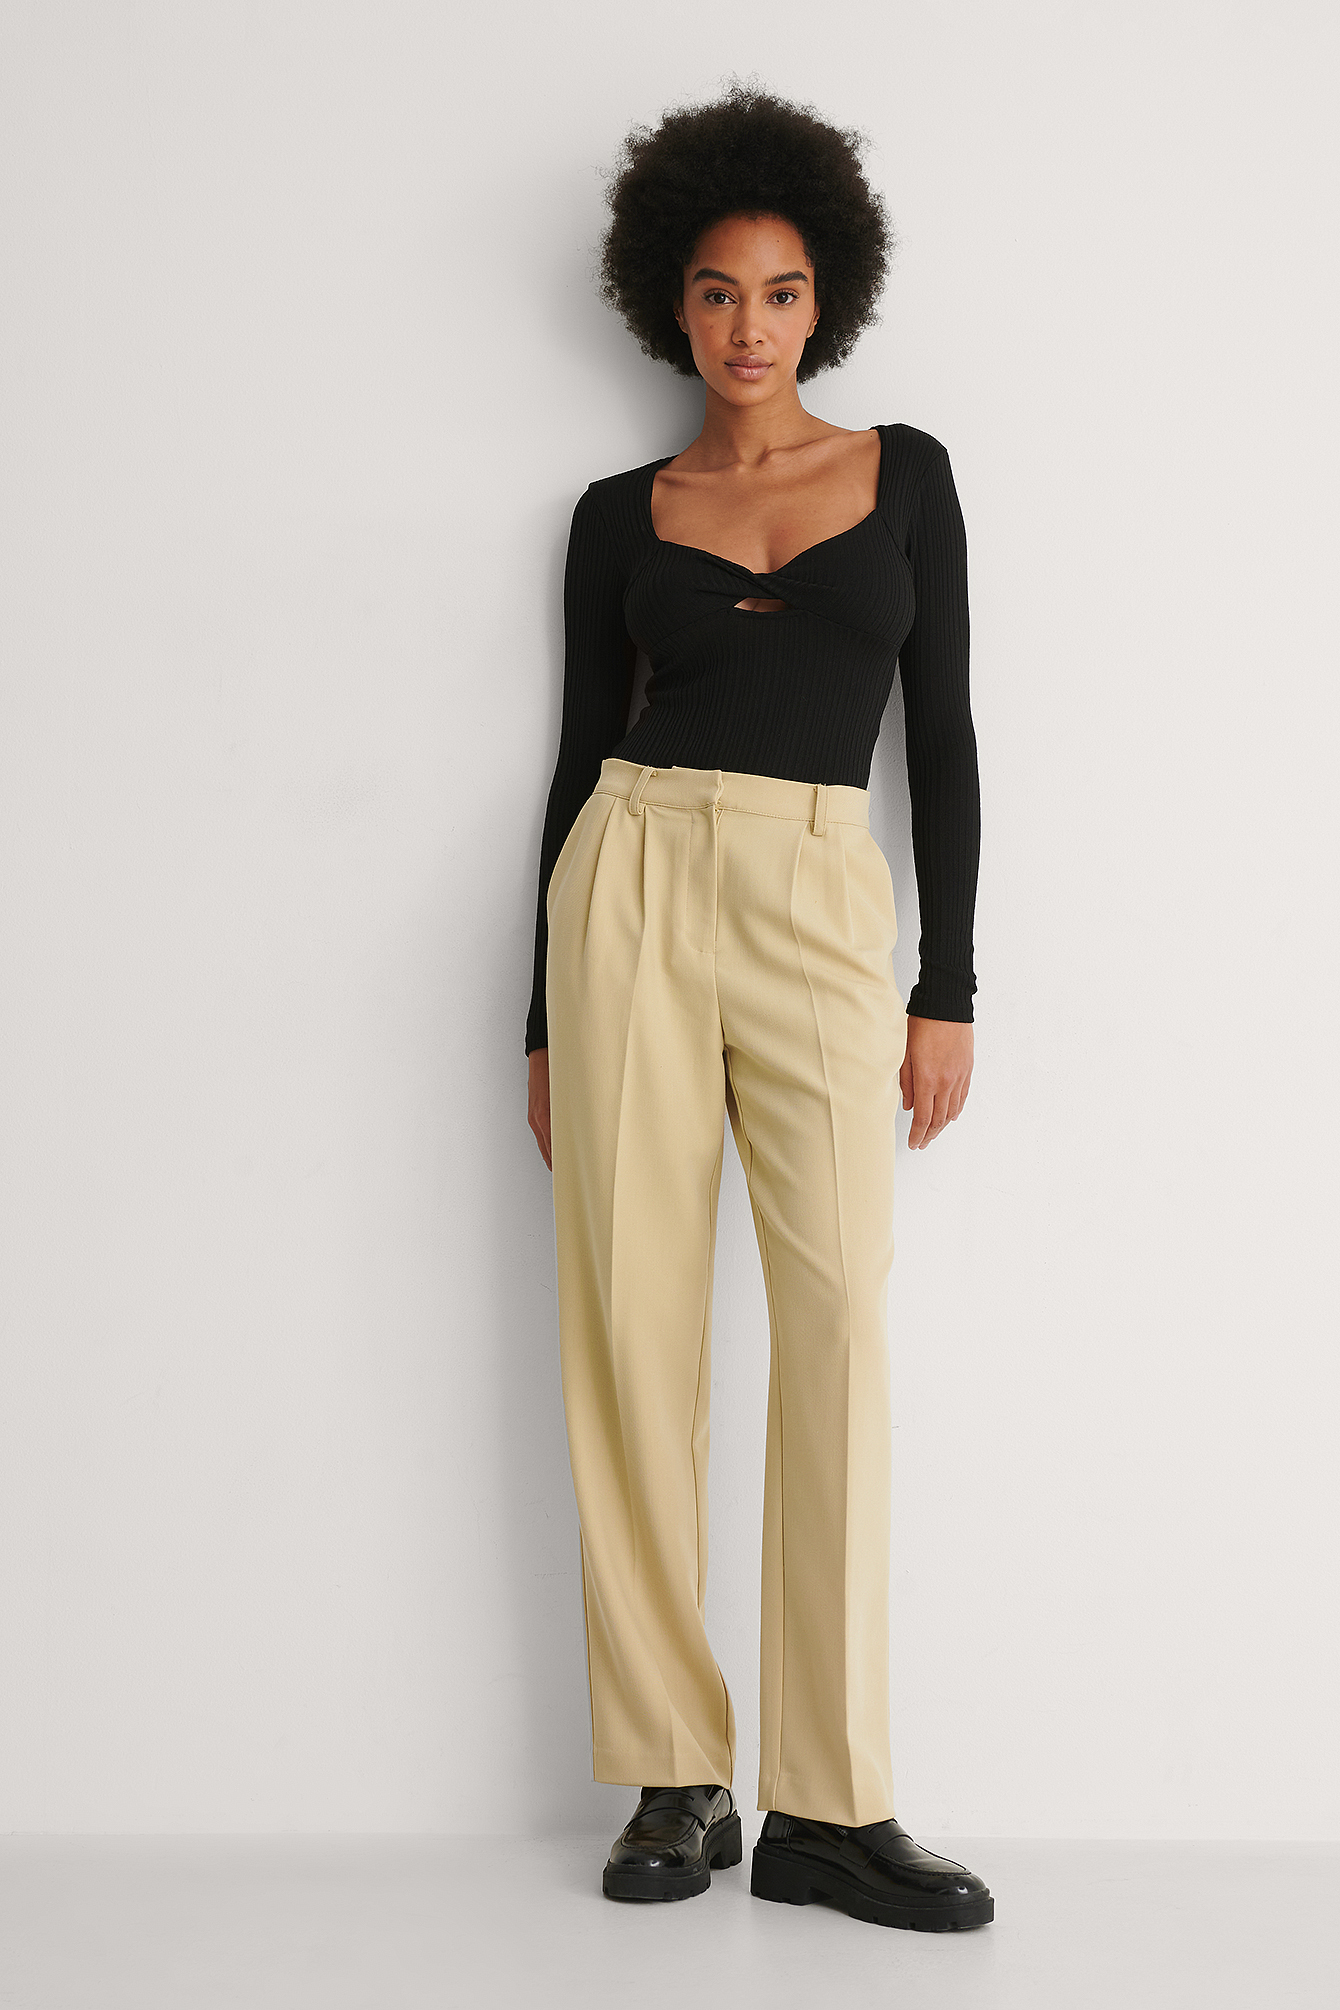 Black Ribbed Front Twist Top